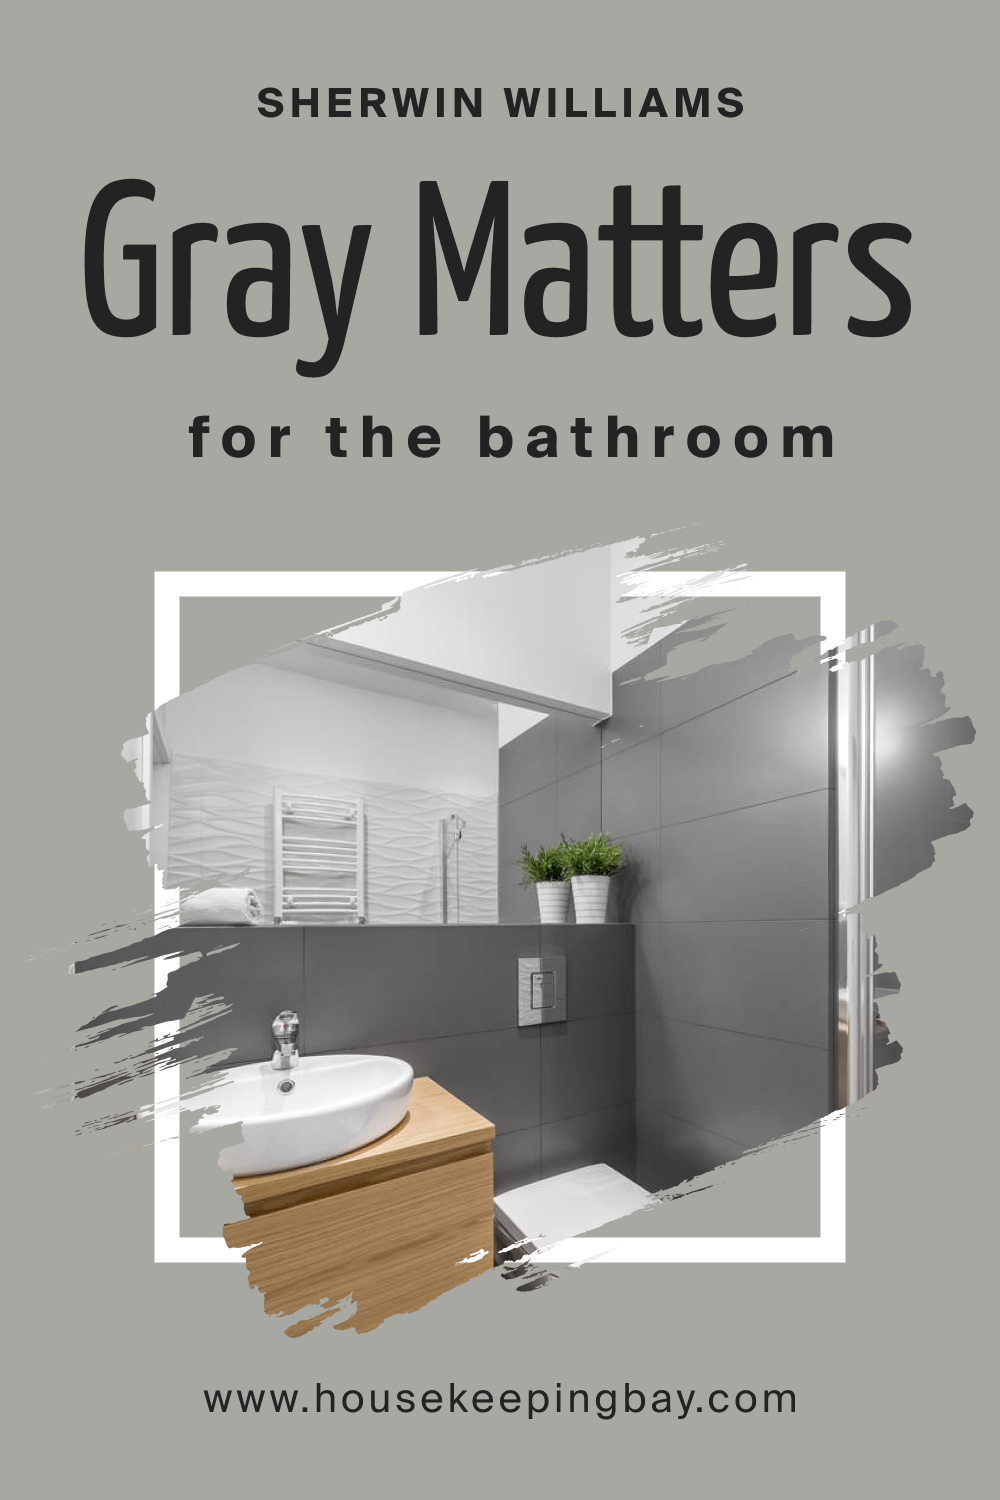 Sherwin Williams. Gray Matters SW 7066 in the Bathroom